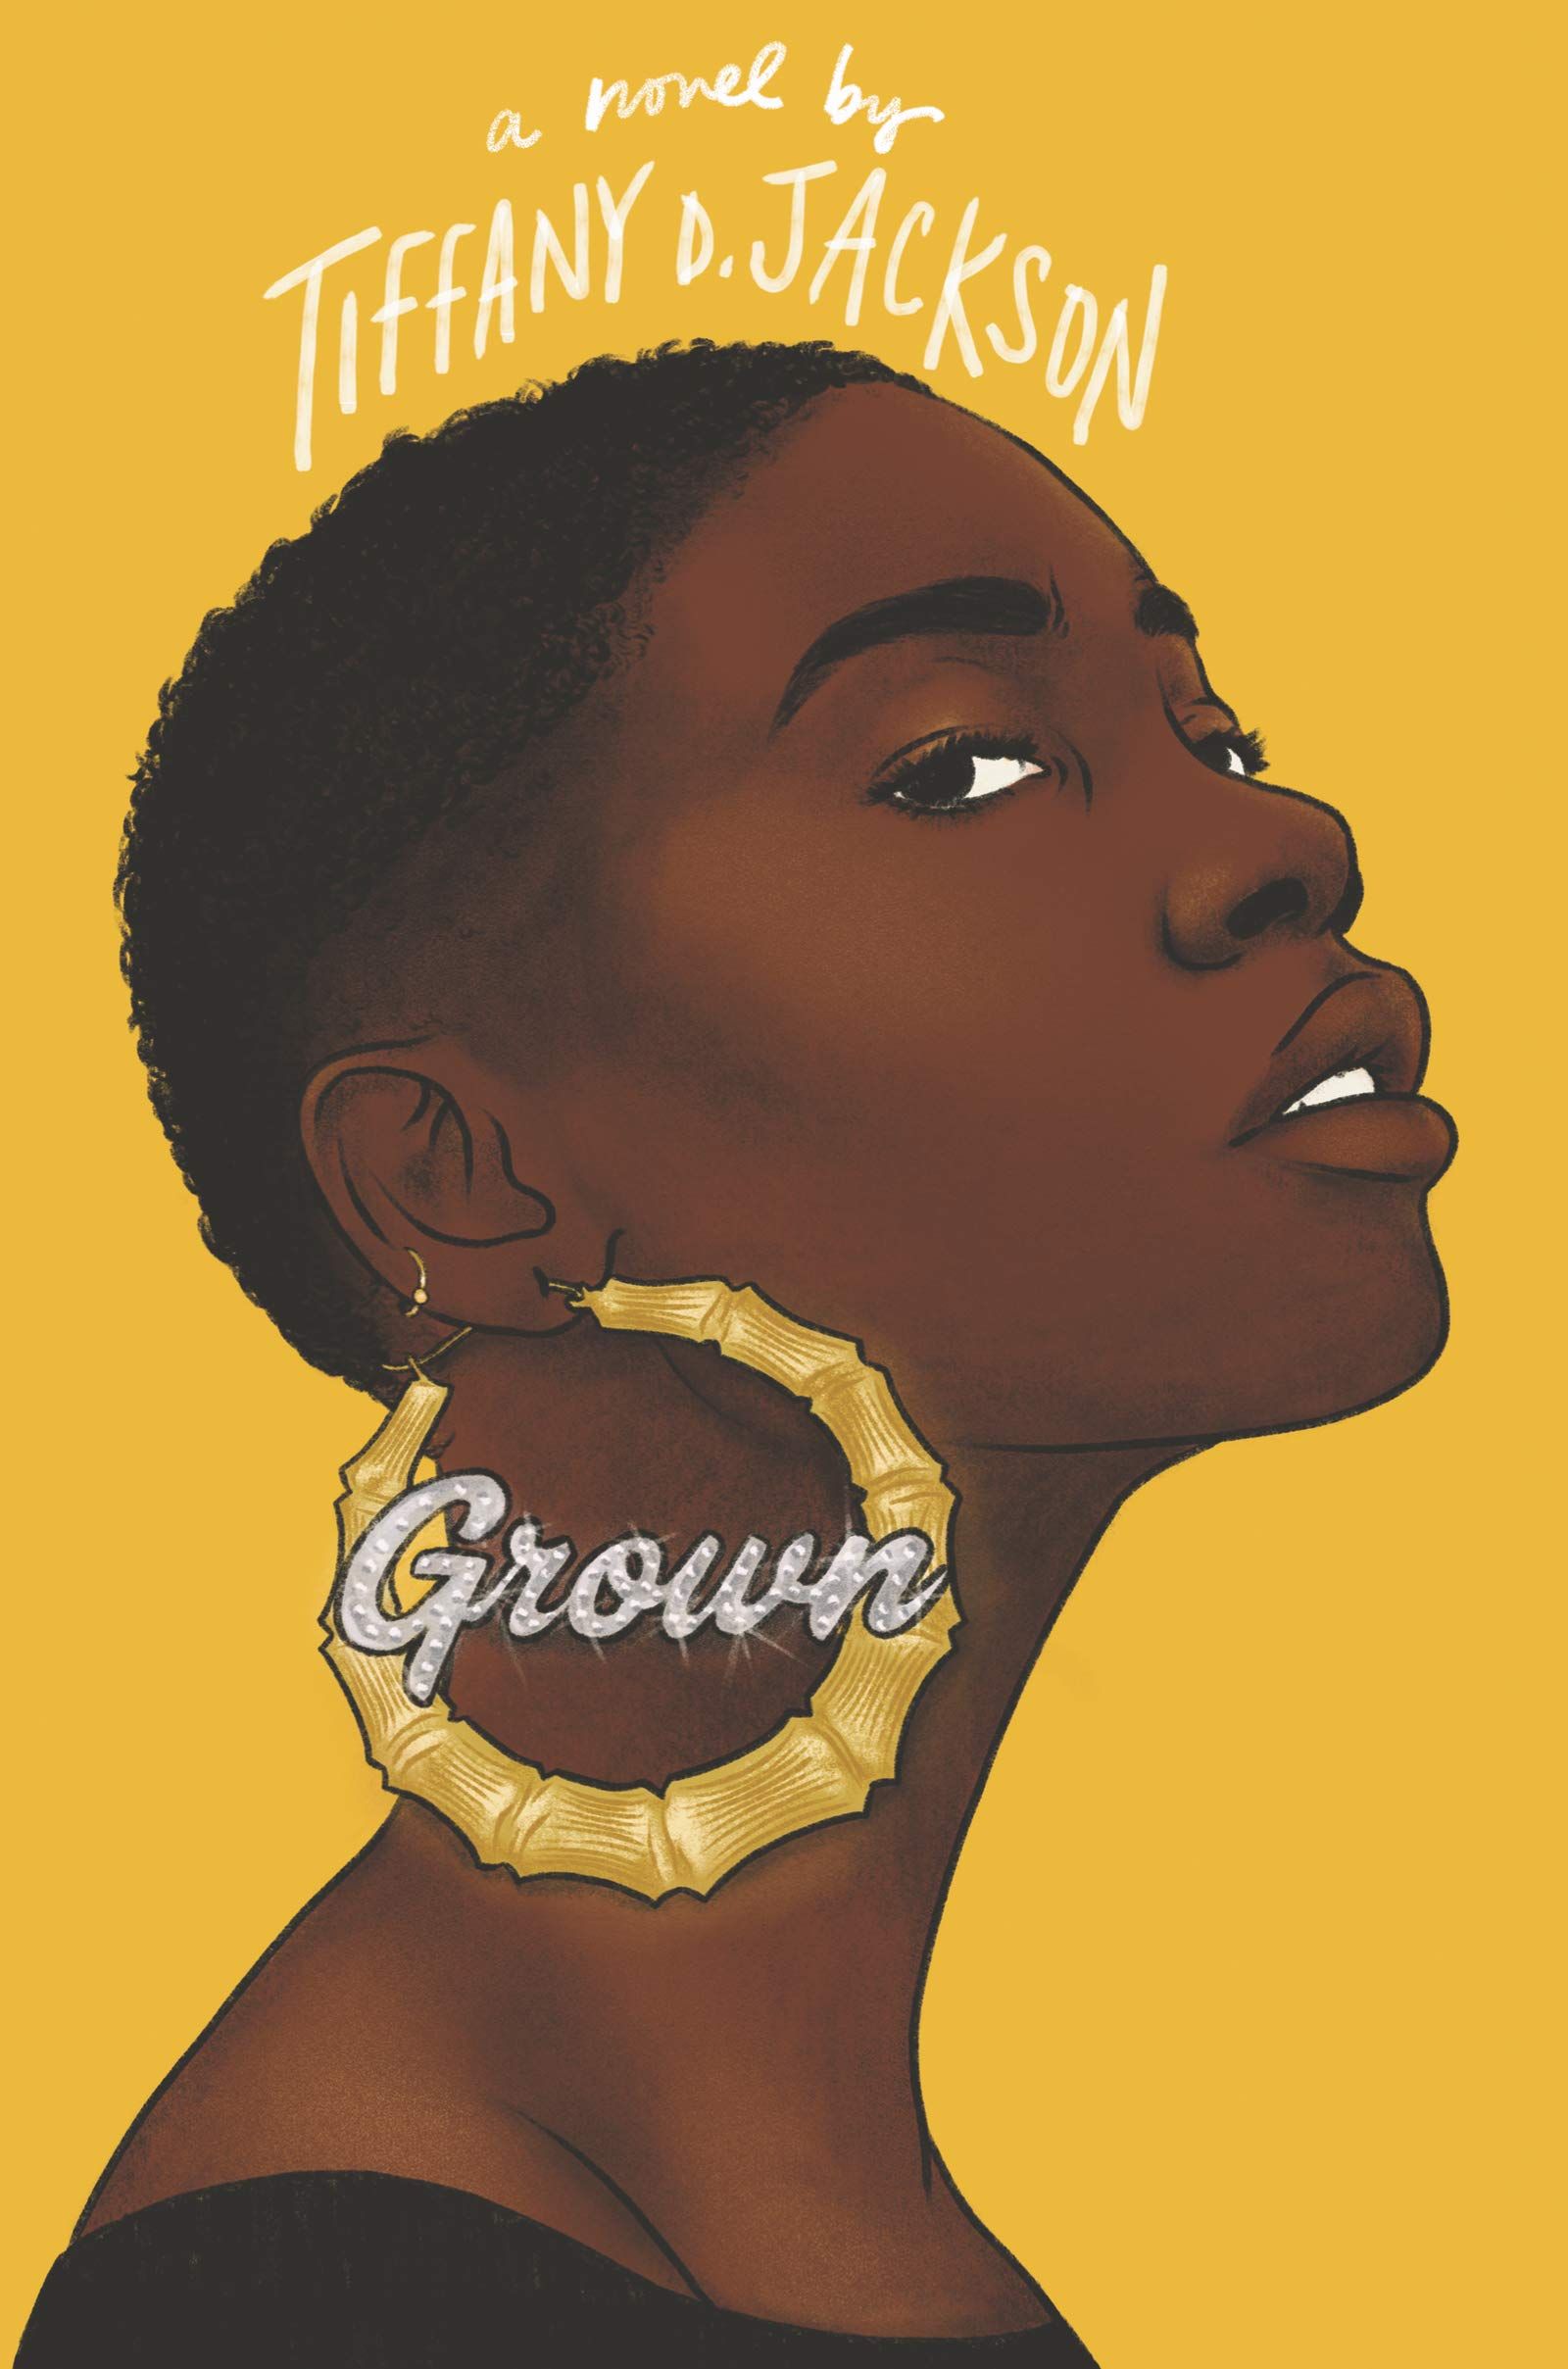 Cover of "Grown," featuring a girl wearing jewelry against a bright yellow background.